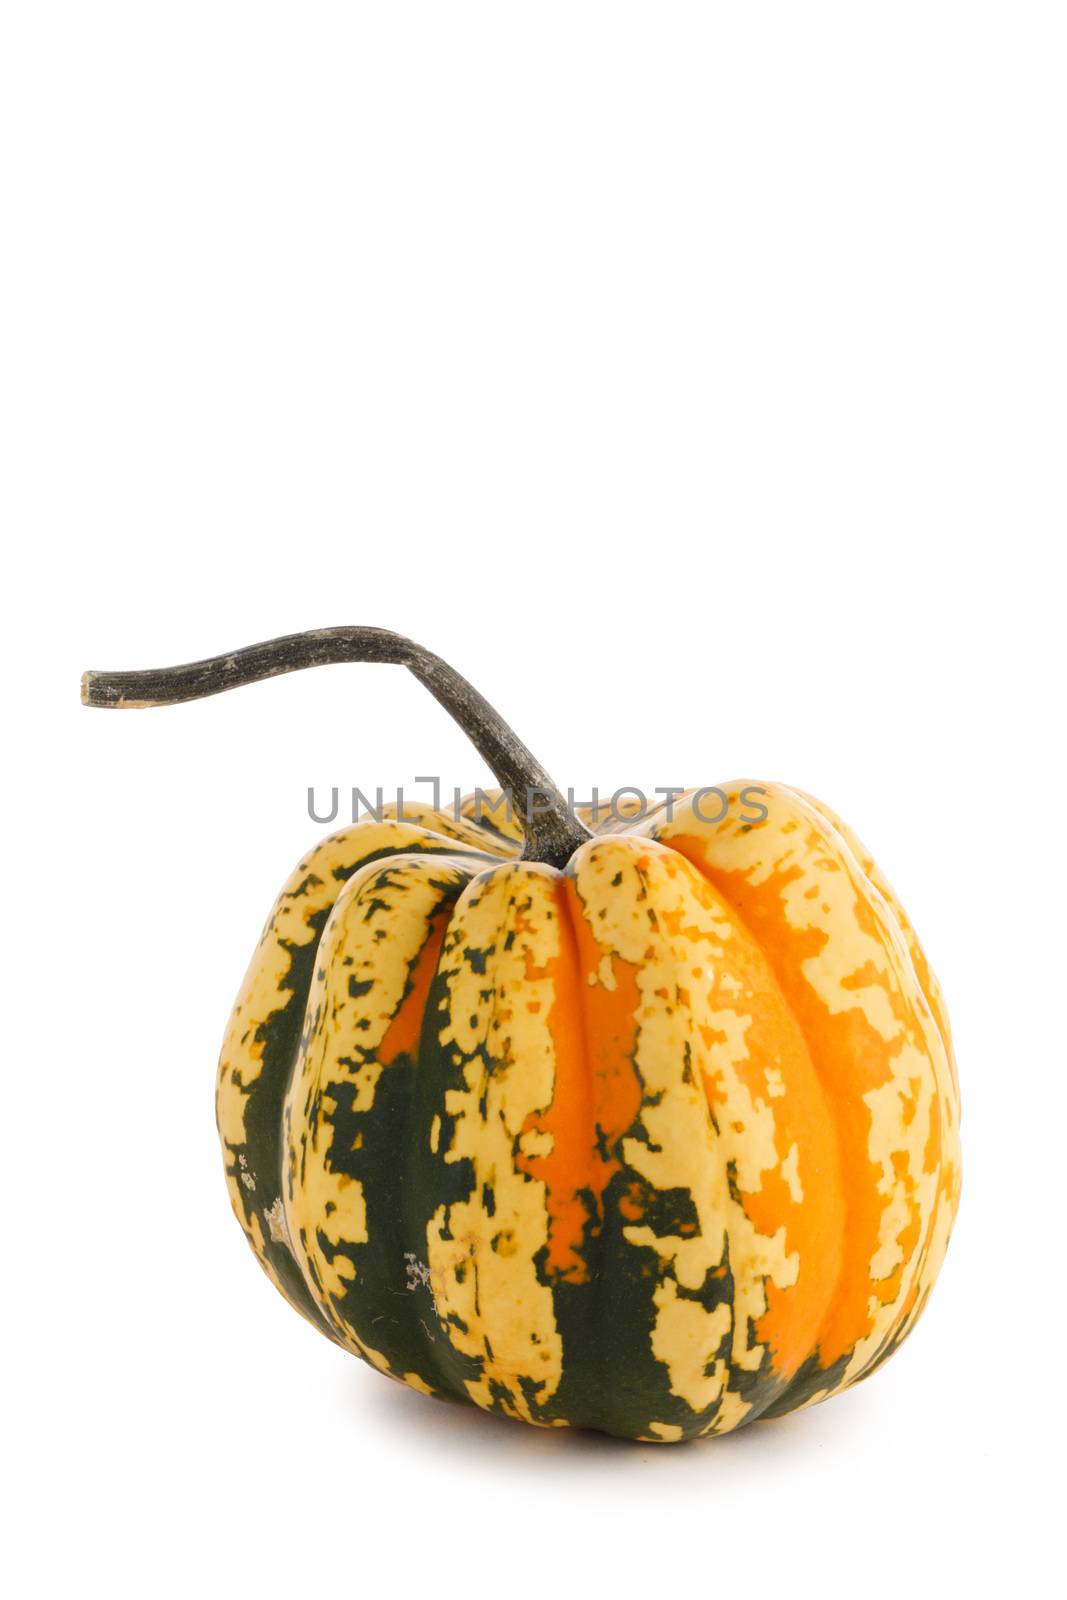 One small striped yellow pumpkin isolated on white background , Halloween concept